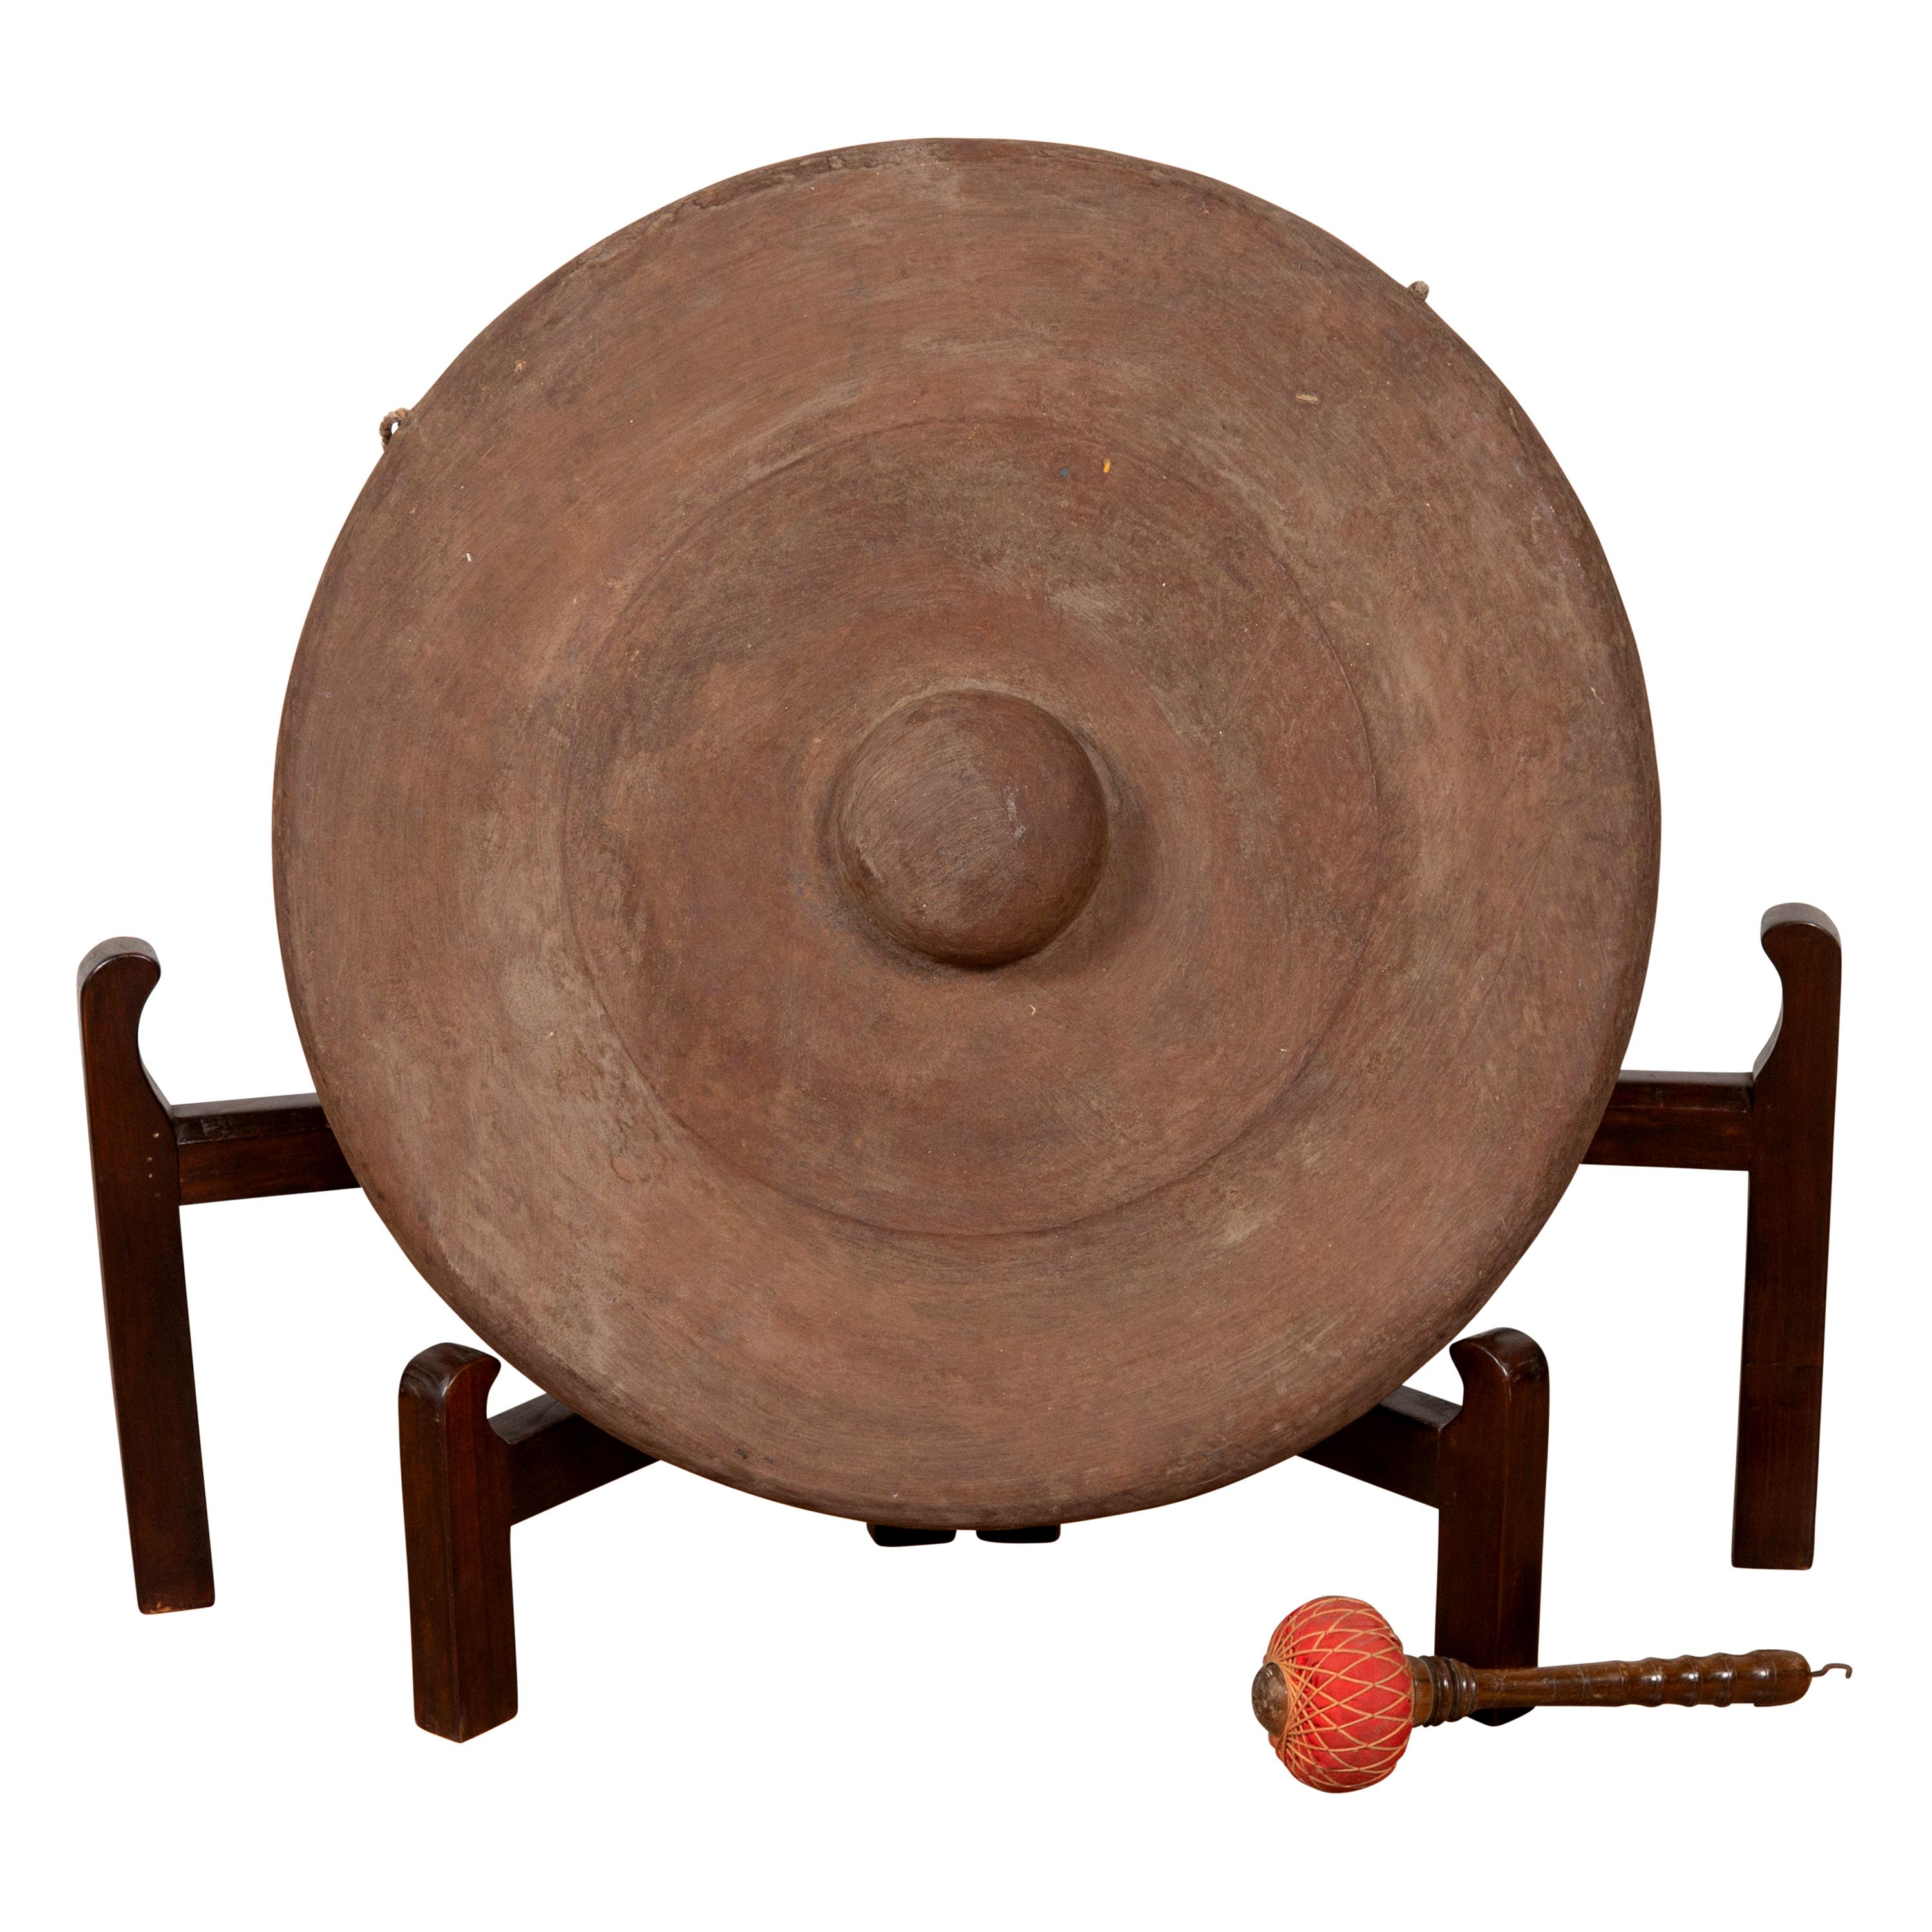 Antique Burmese Bronze Temple Gong with Red Mallet and Raised Center